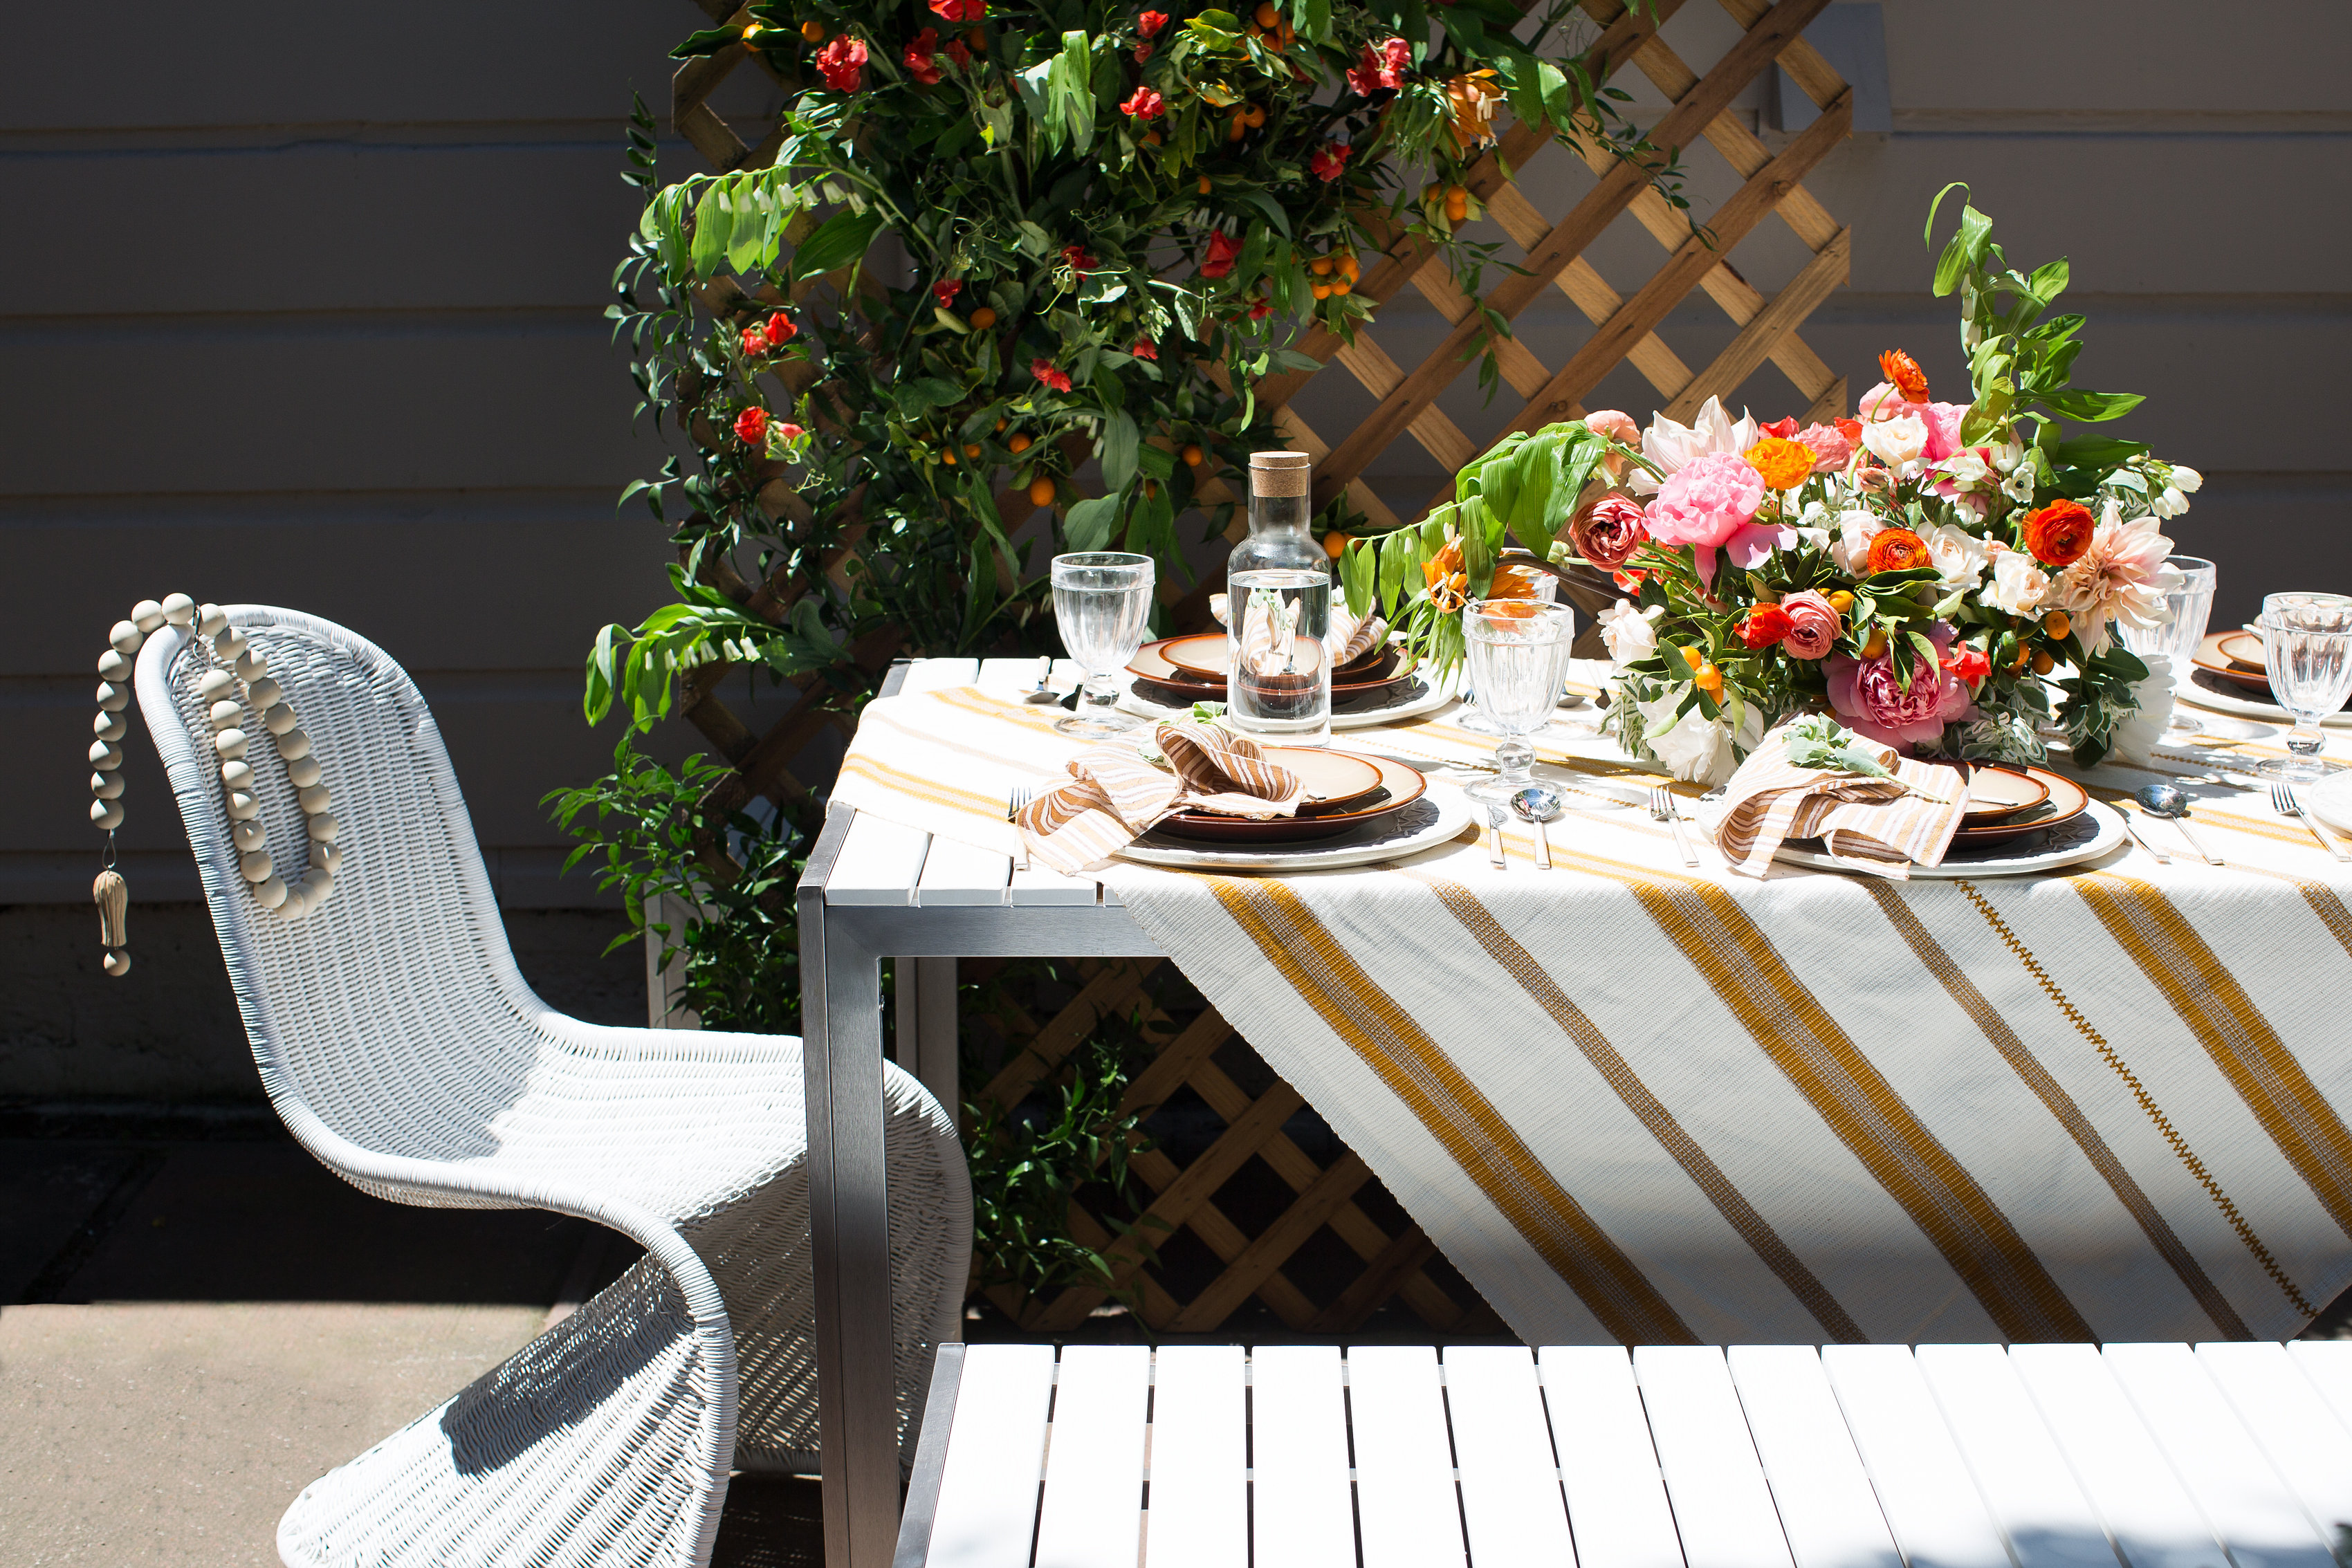 Set a stunning outdoor table with apartment 34